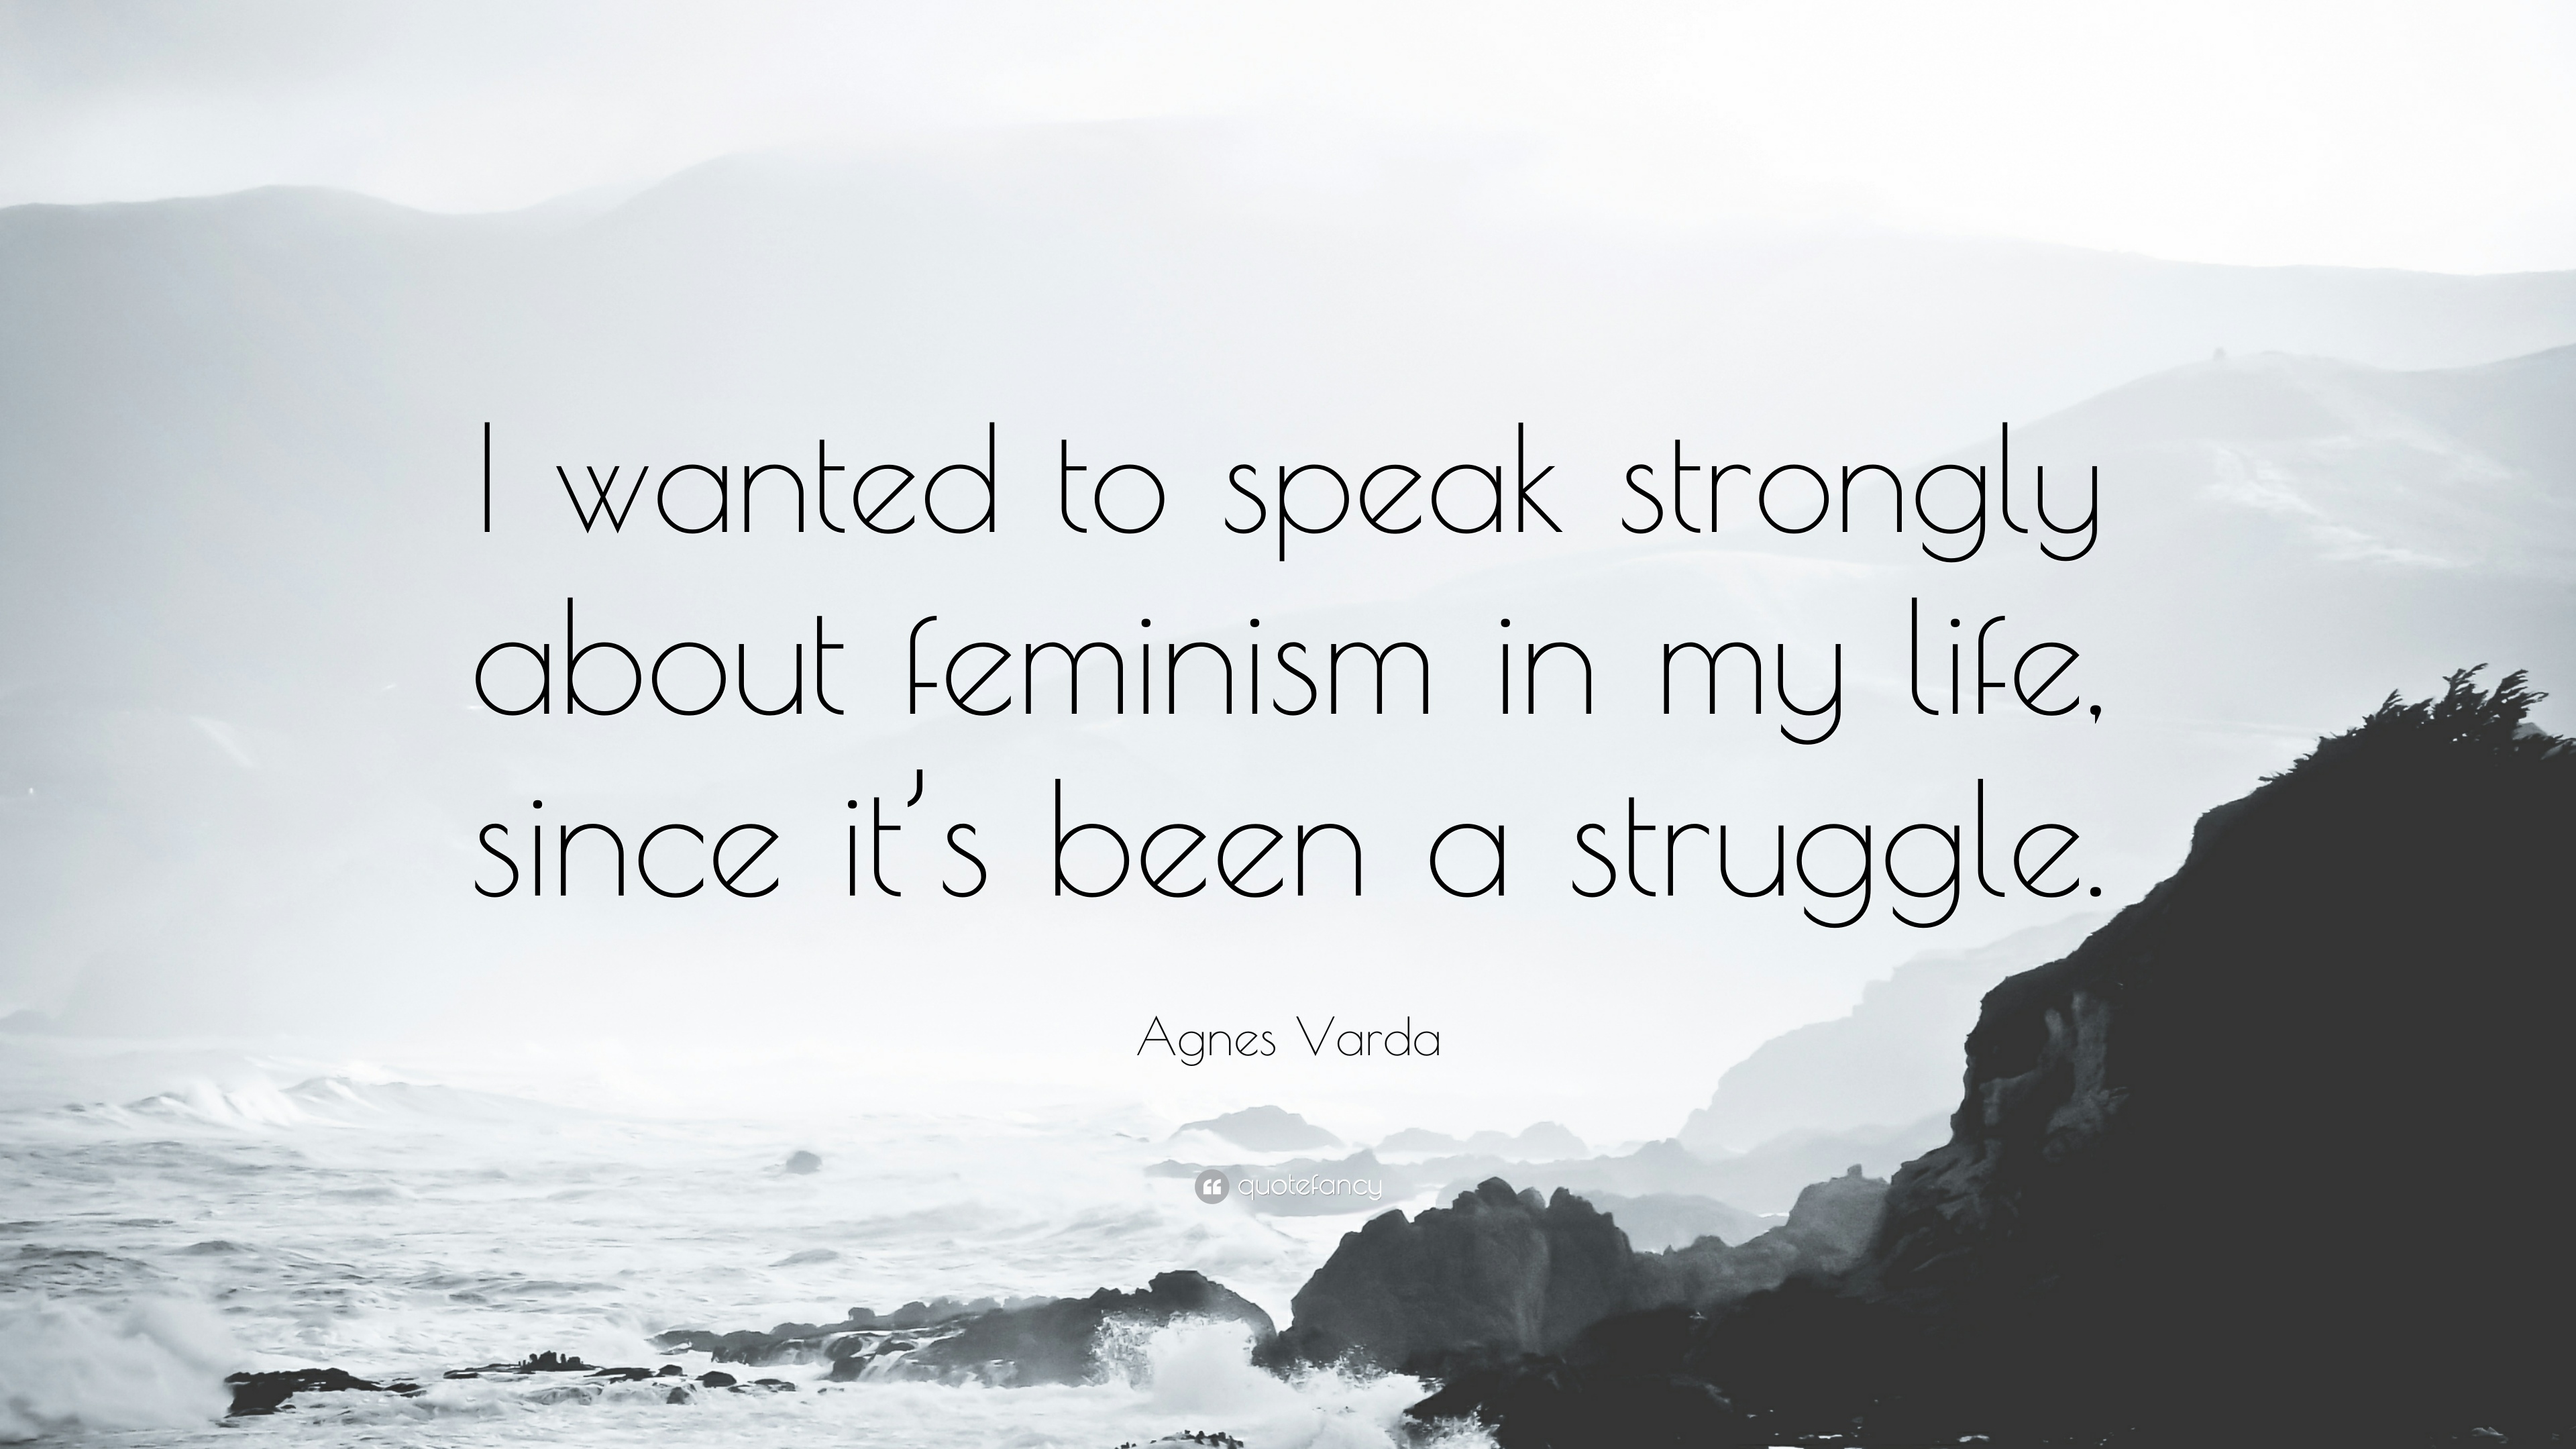 Agnes Varda Quote: “I wanted to speak strongly about feminism in my